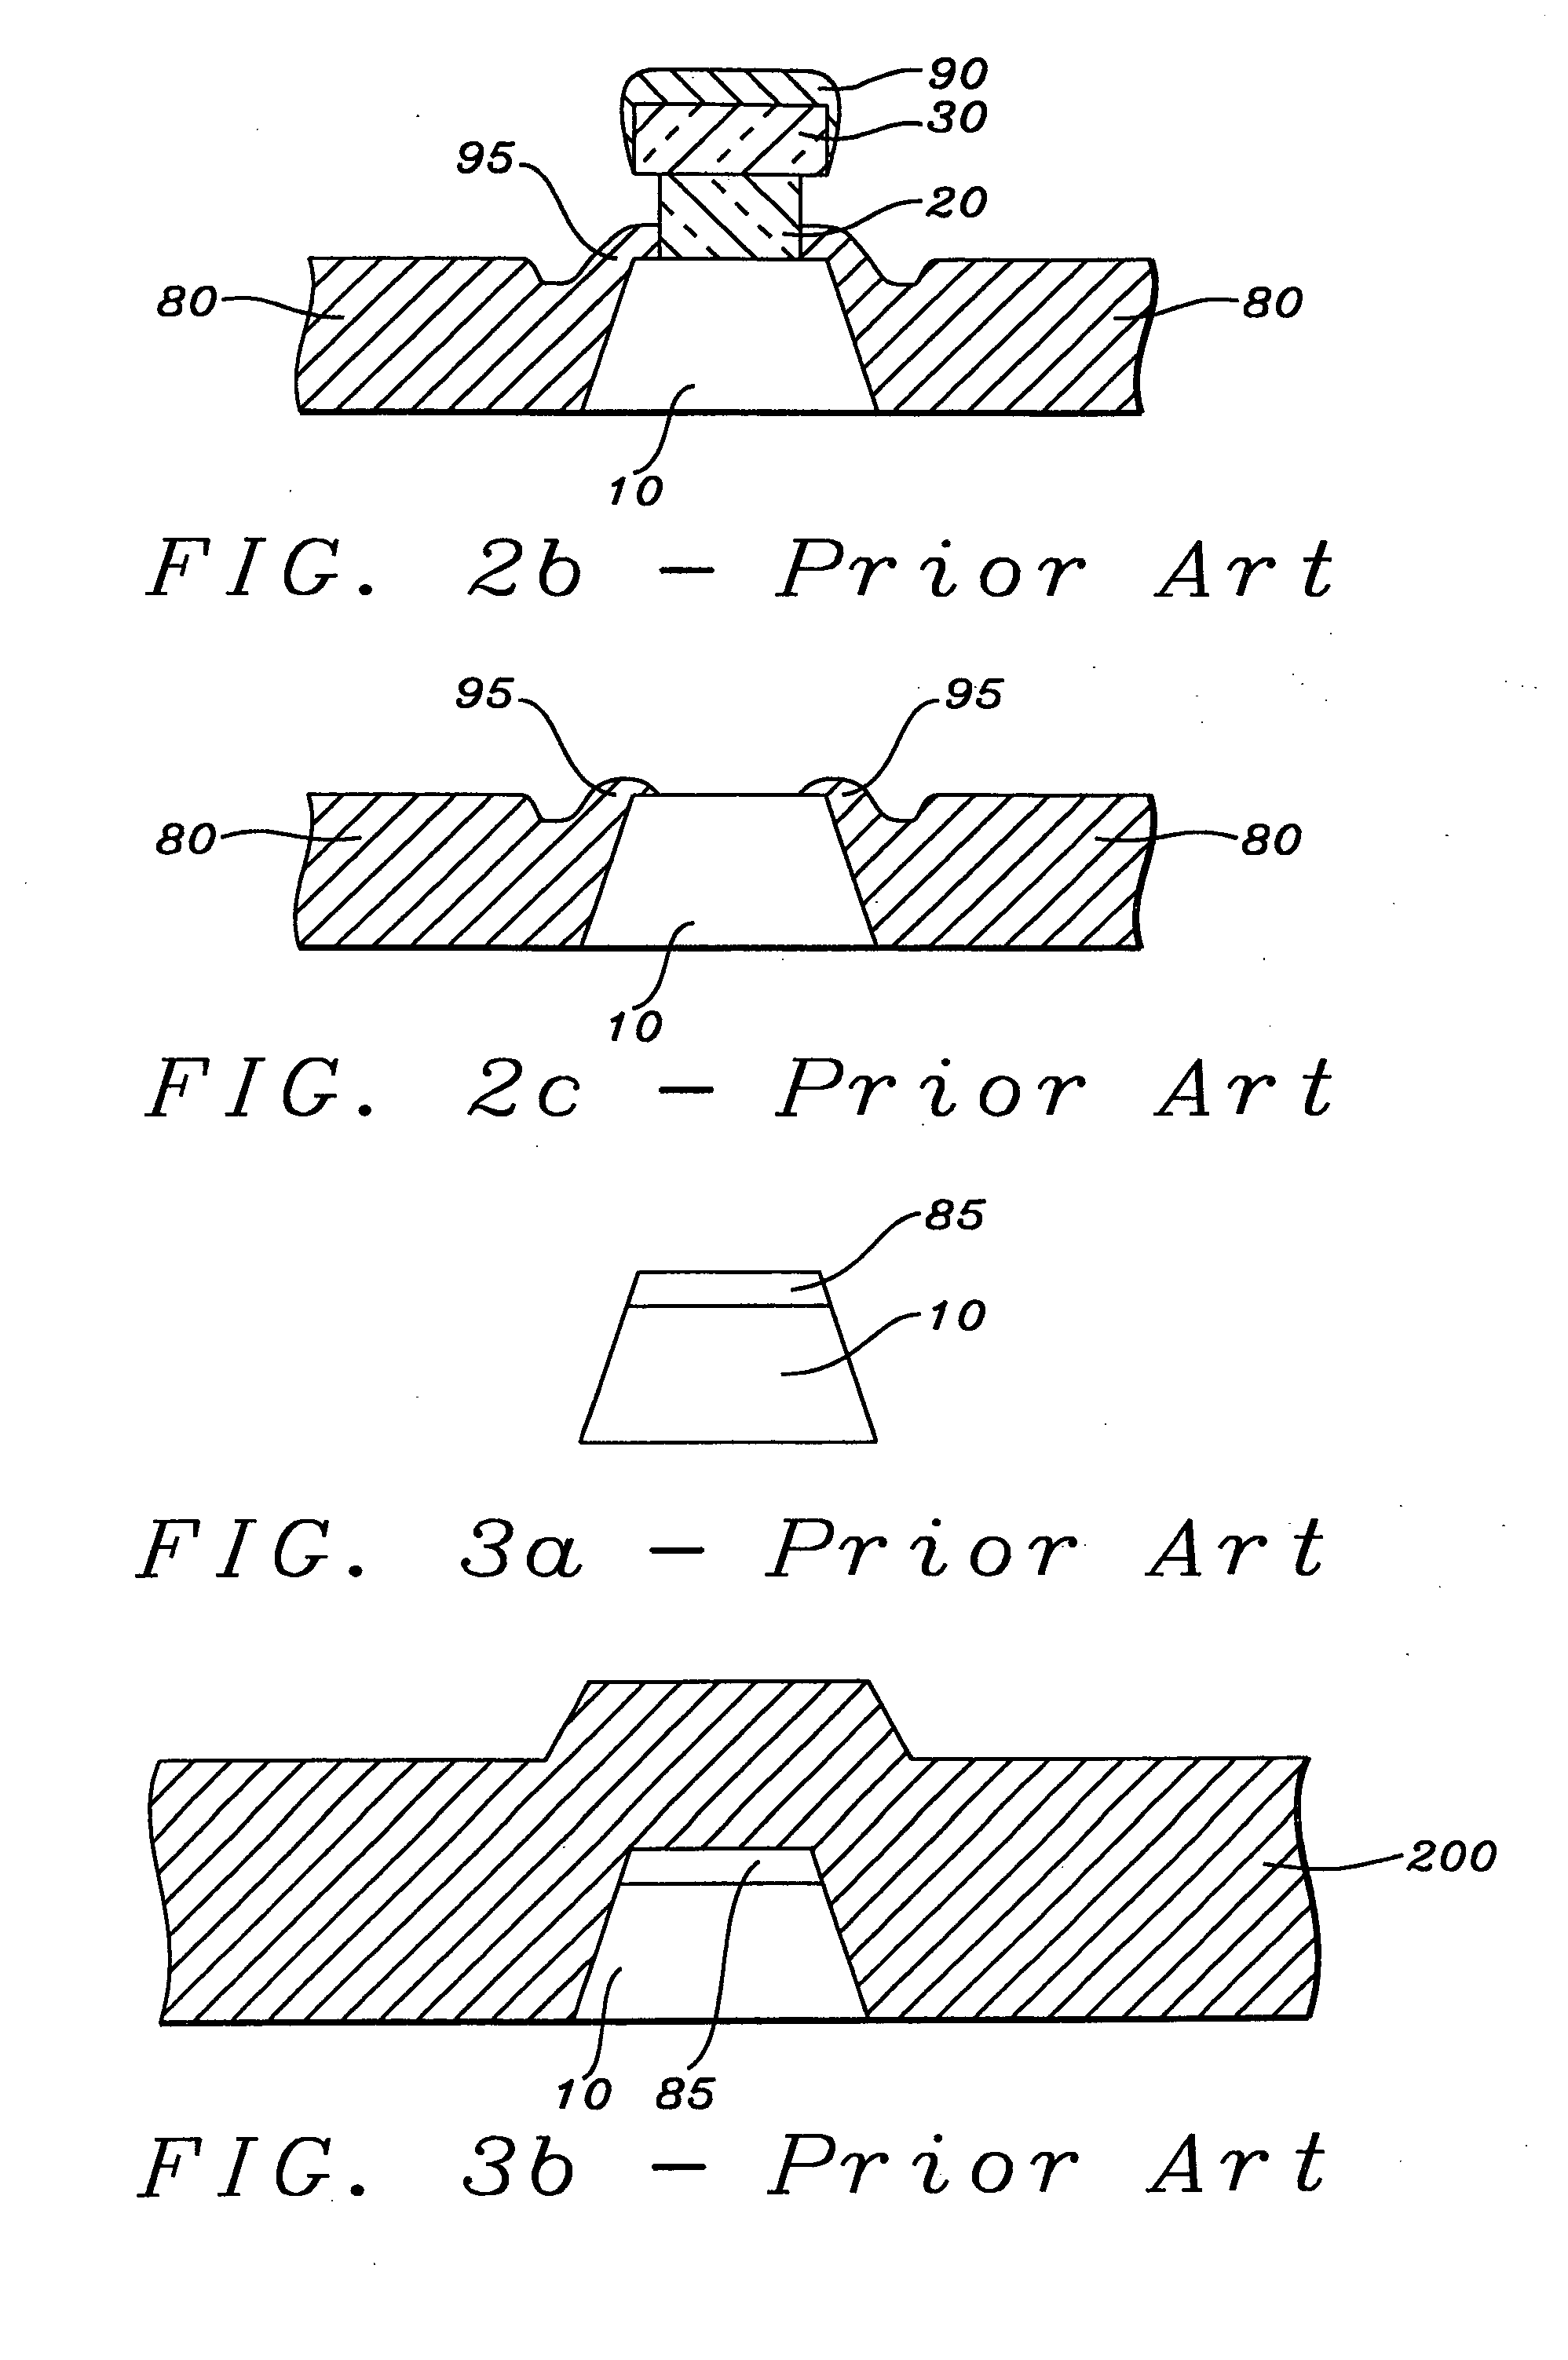 MRAM cell with flat topography and controlled bit line to free layer distance and method of manufacture